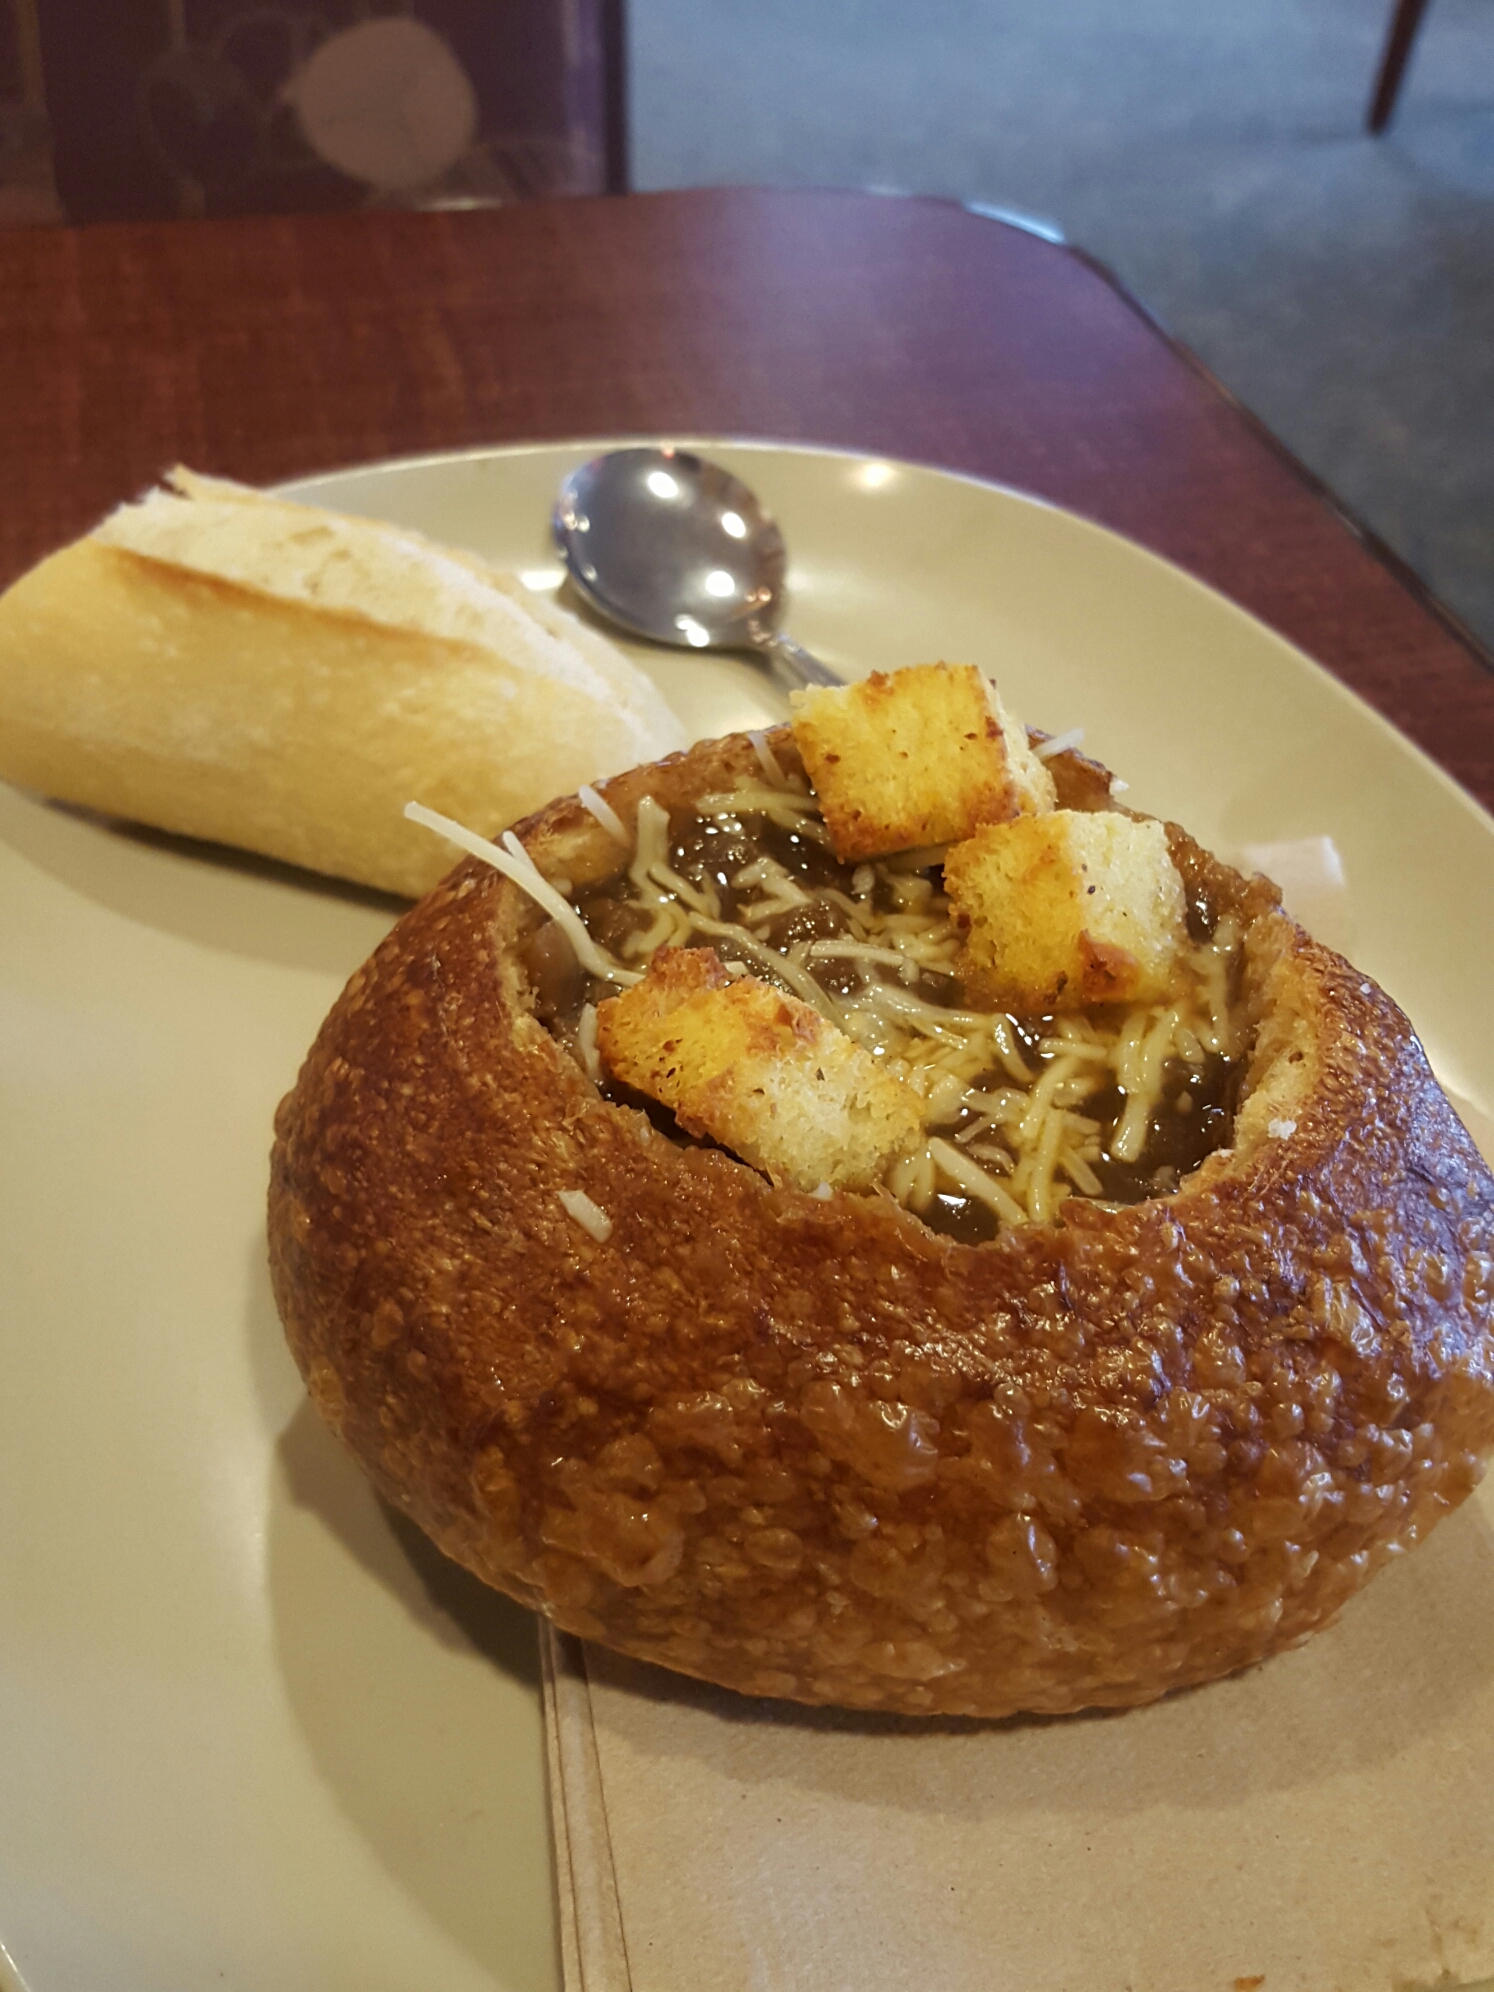 French Onion Soup in a Bread Bowl, courtesy of Panera Bread.